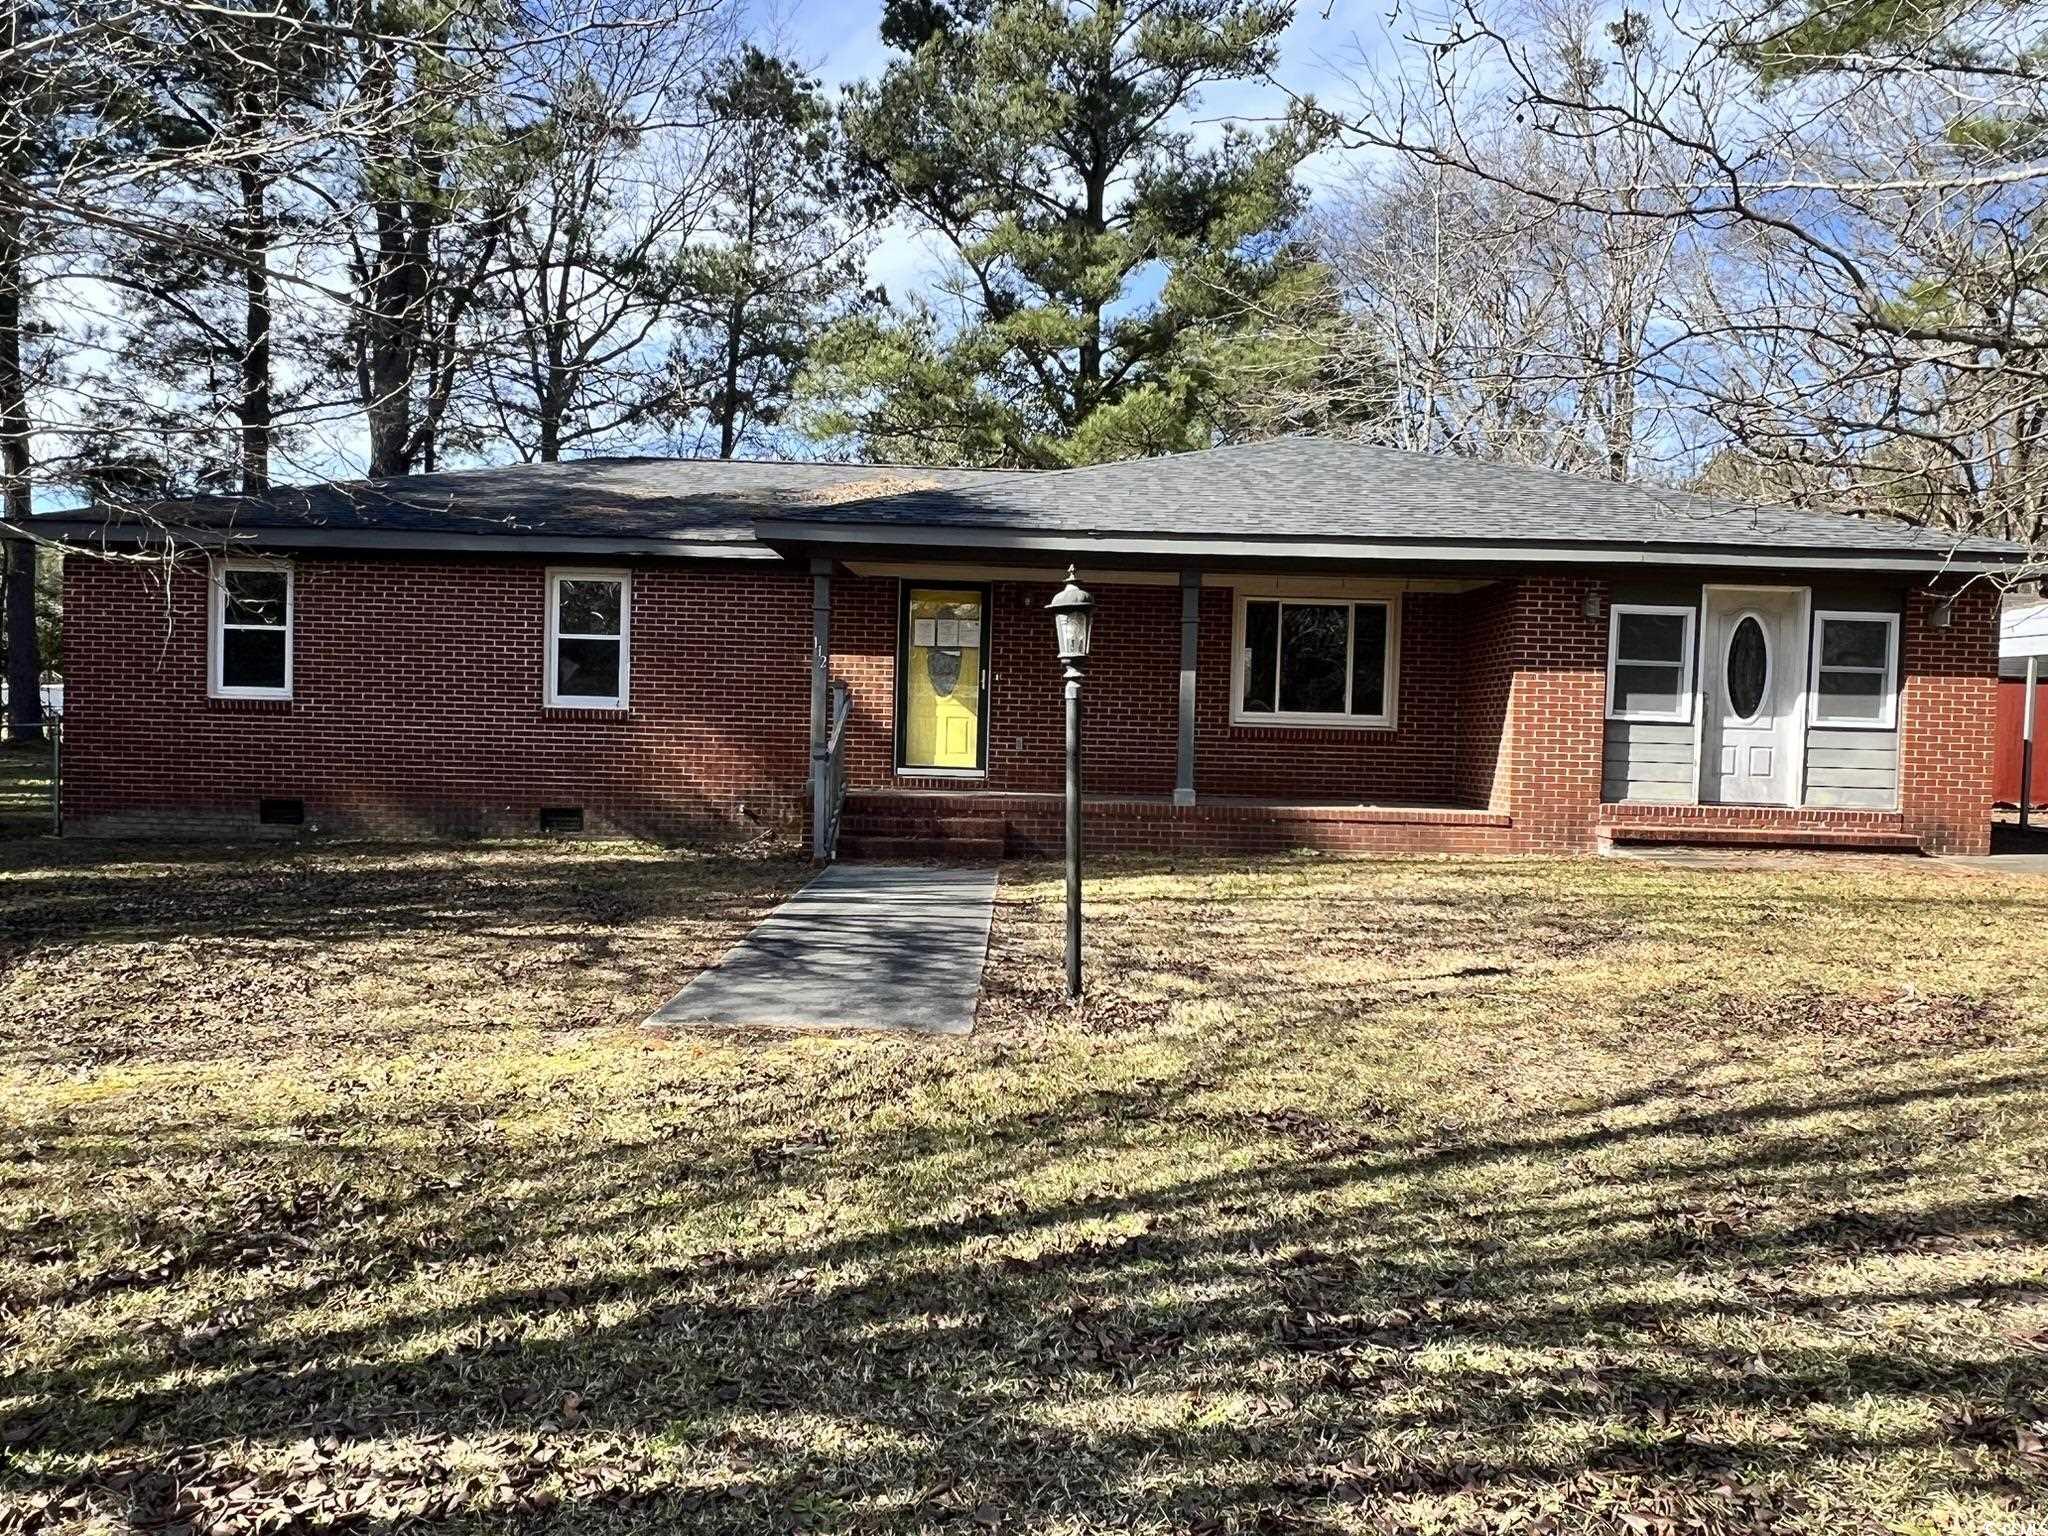 this 3 bedroom 3 bathroom brick home is located on a large lot . this home features a covered front porch, detached carport and detached storage. property is owned by the us dept. of hud, hud case # 461-465375,in, subject to appraisal seller makes no representations or warranties as to property condition. hud homes are sold as is equal housing opportunity seller may contribute towards buyer's closing costs, upon buyer request, ask your agent for more details.